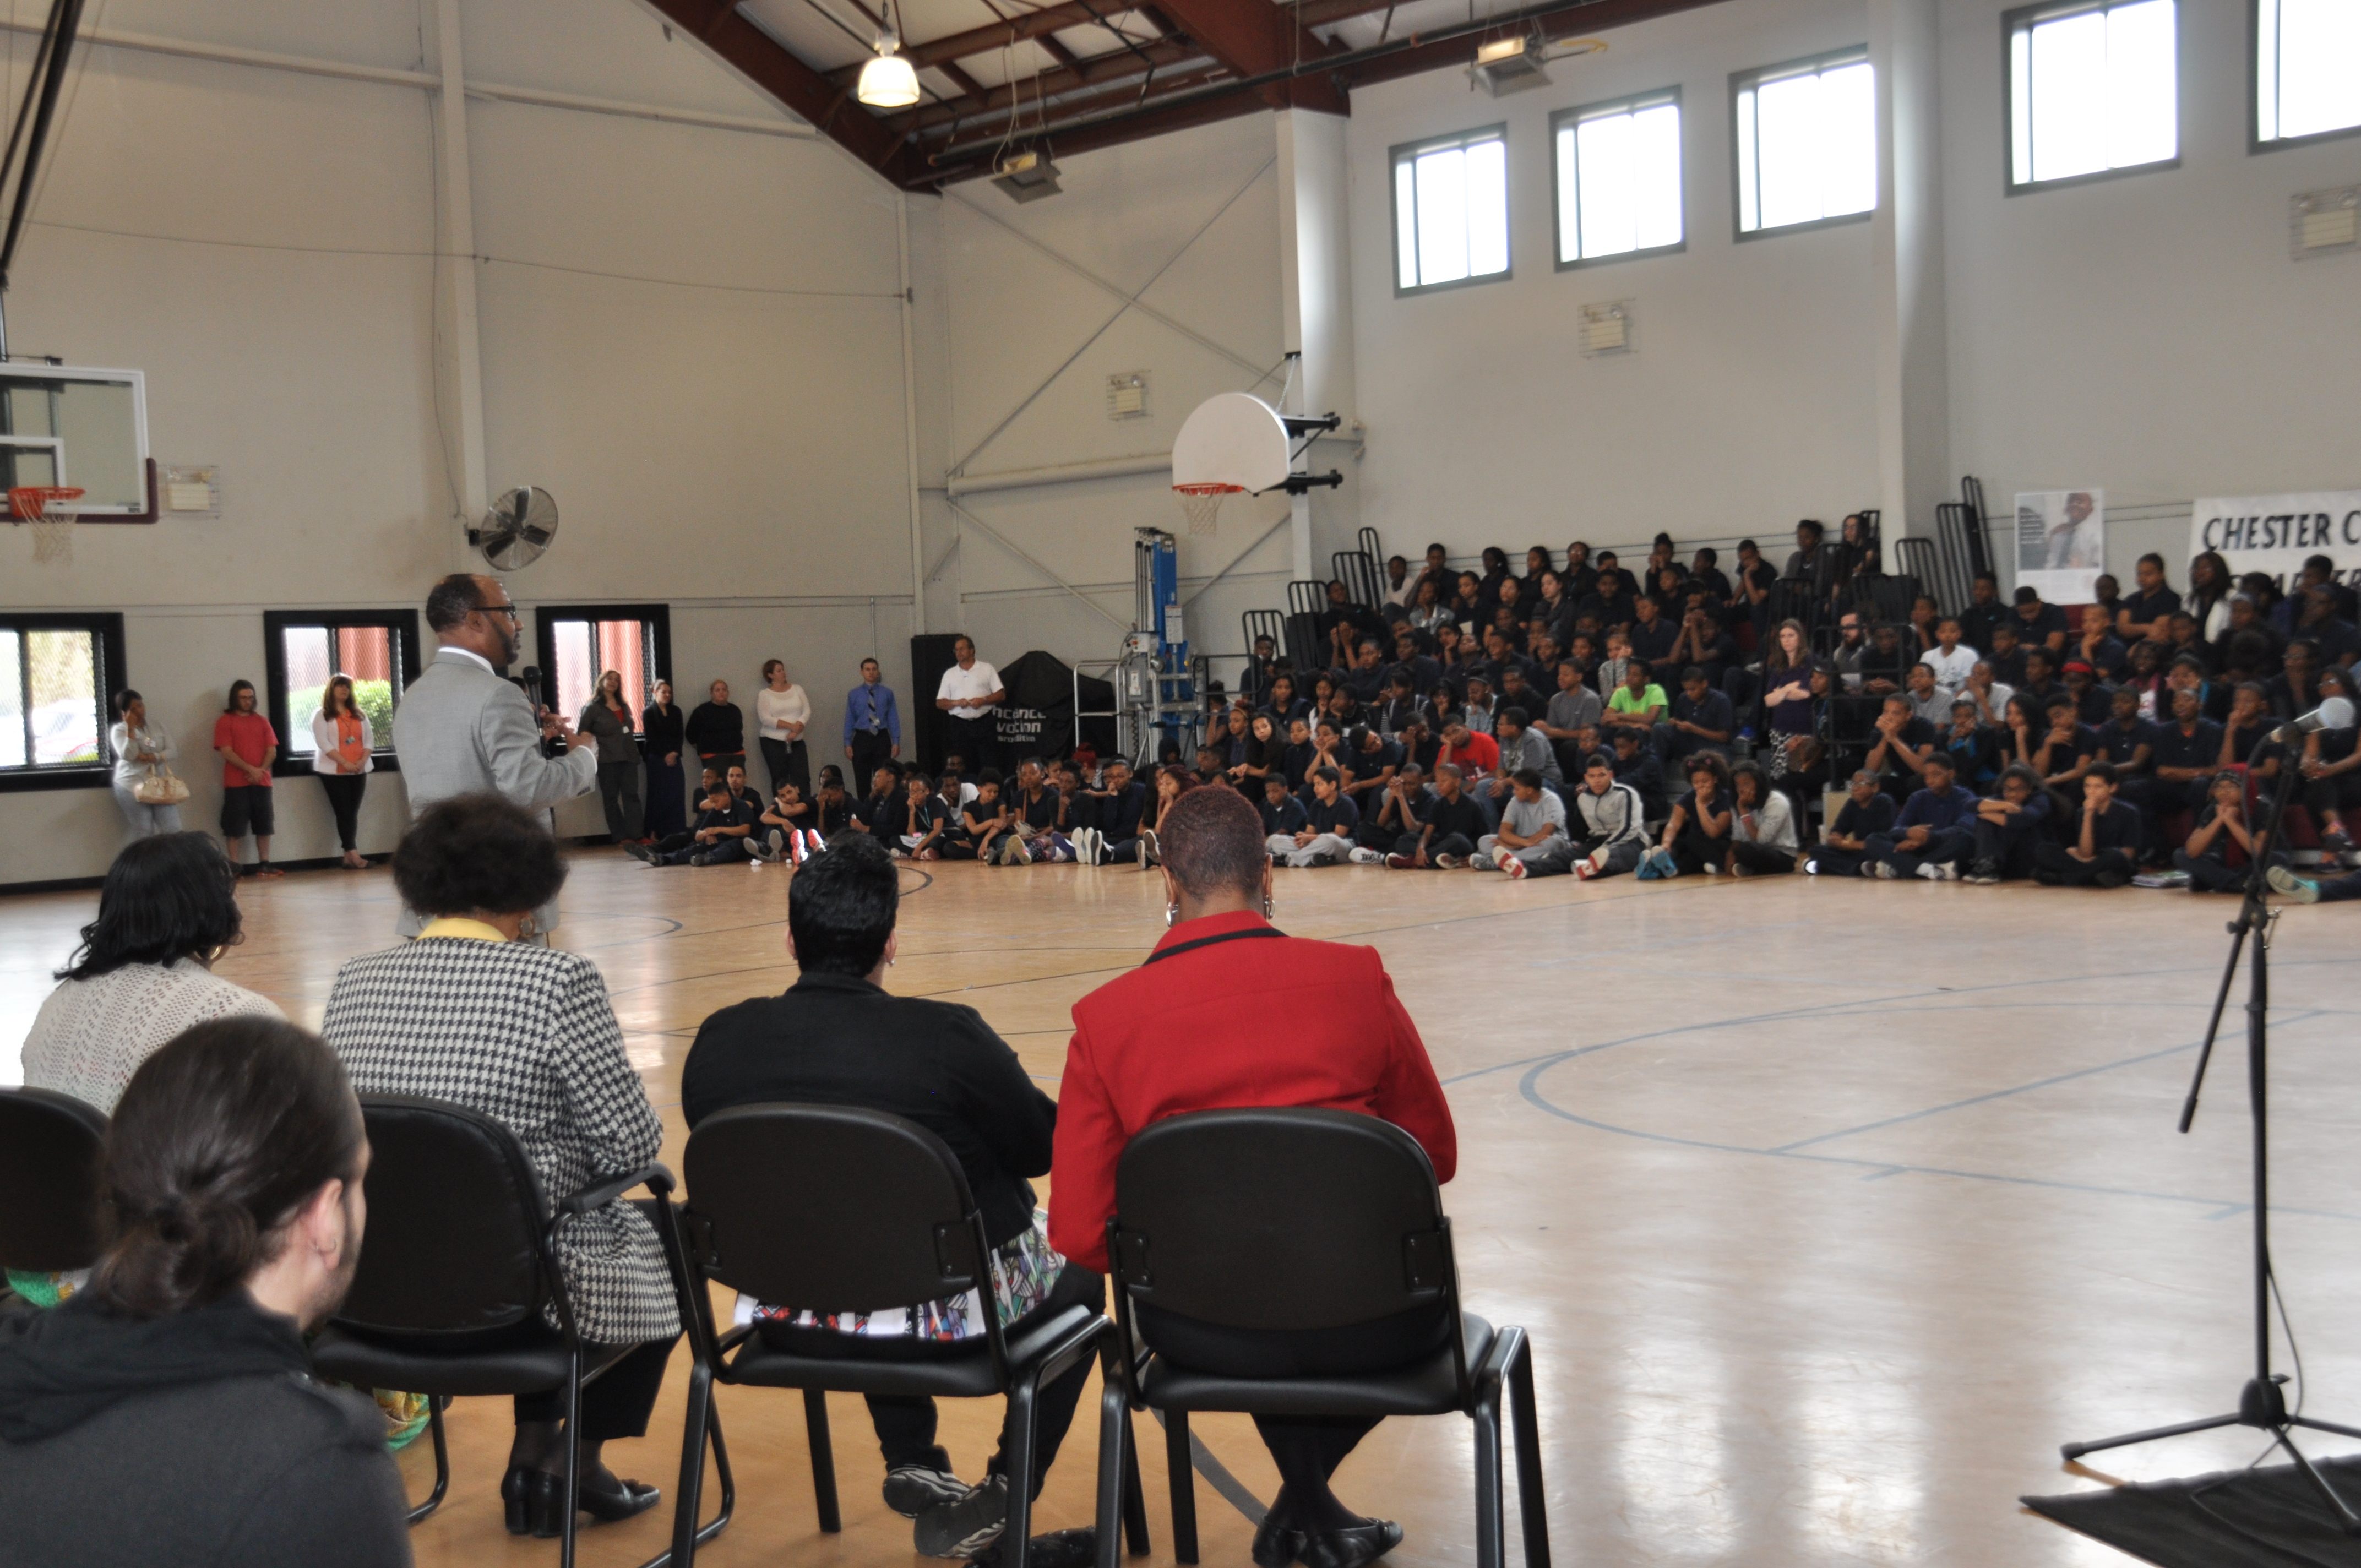 Chester Community Charter School (CCCS) recently held its First Annual Teen Summit for Students event wherein more than 300 seventh- and eighth-grade students participated to discuss topics such as co